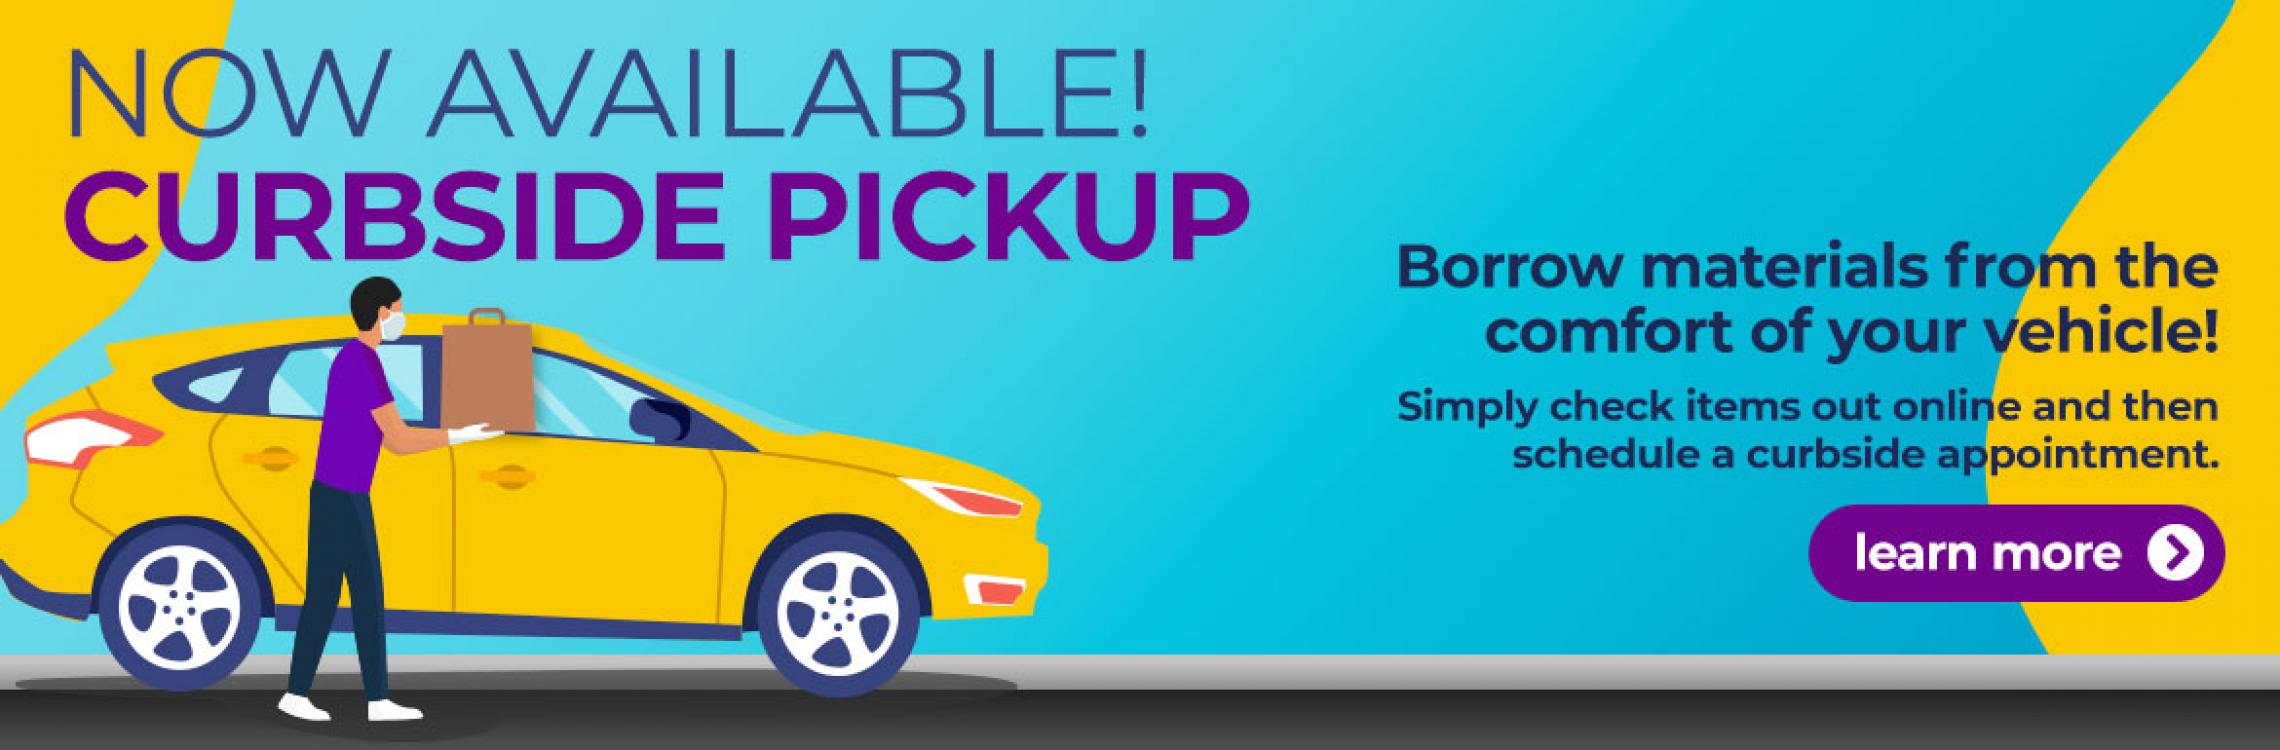 Curbside pickup now available